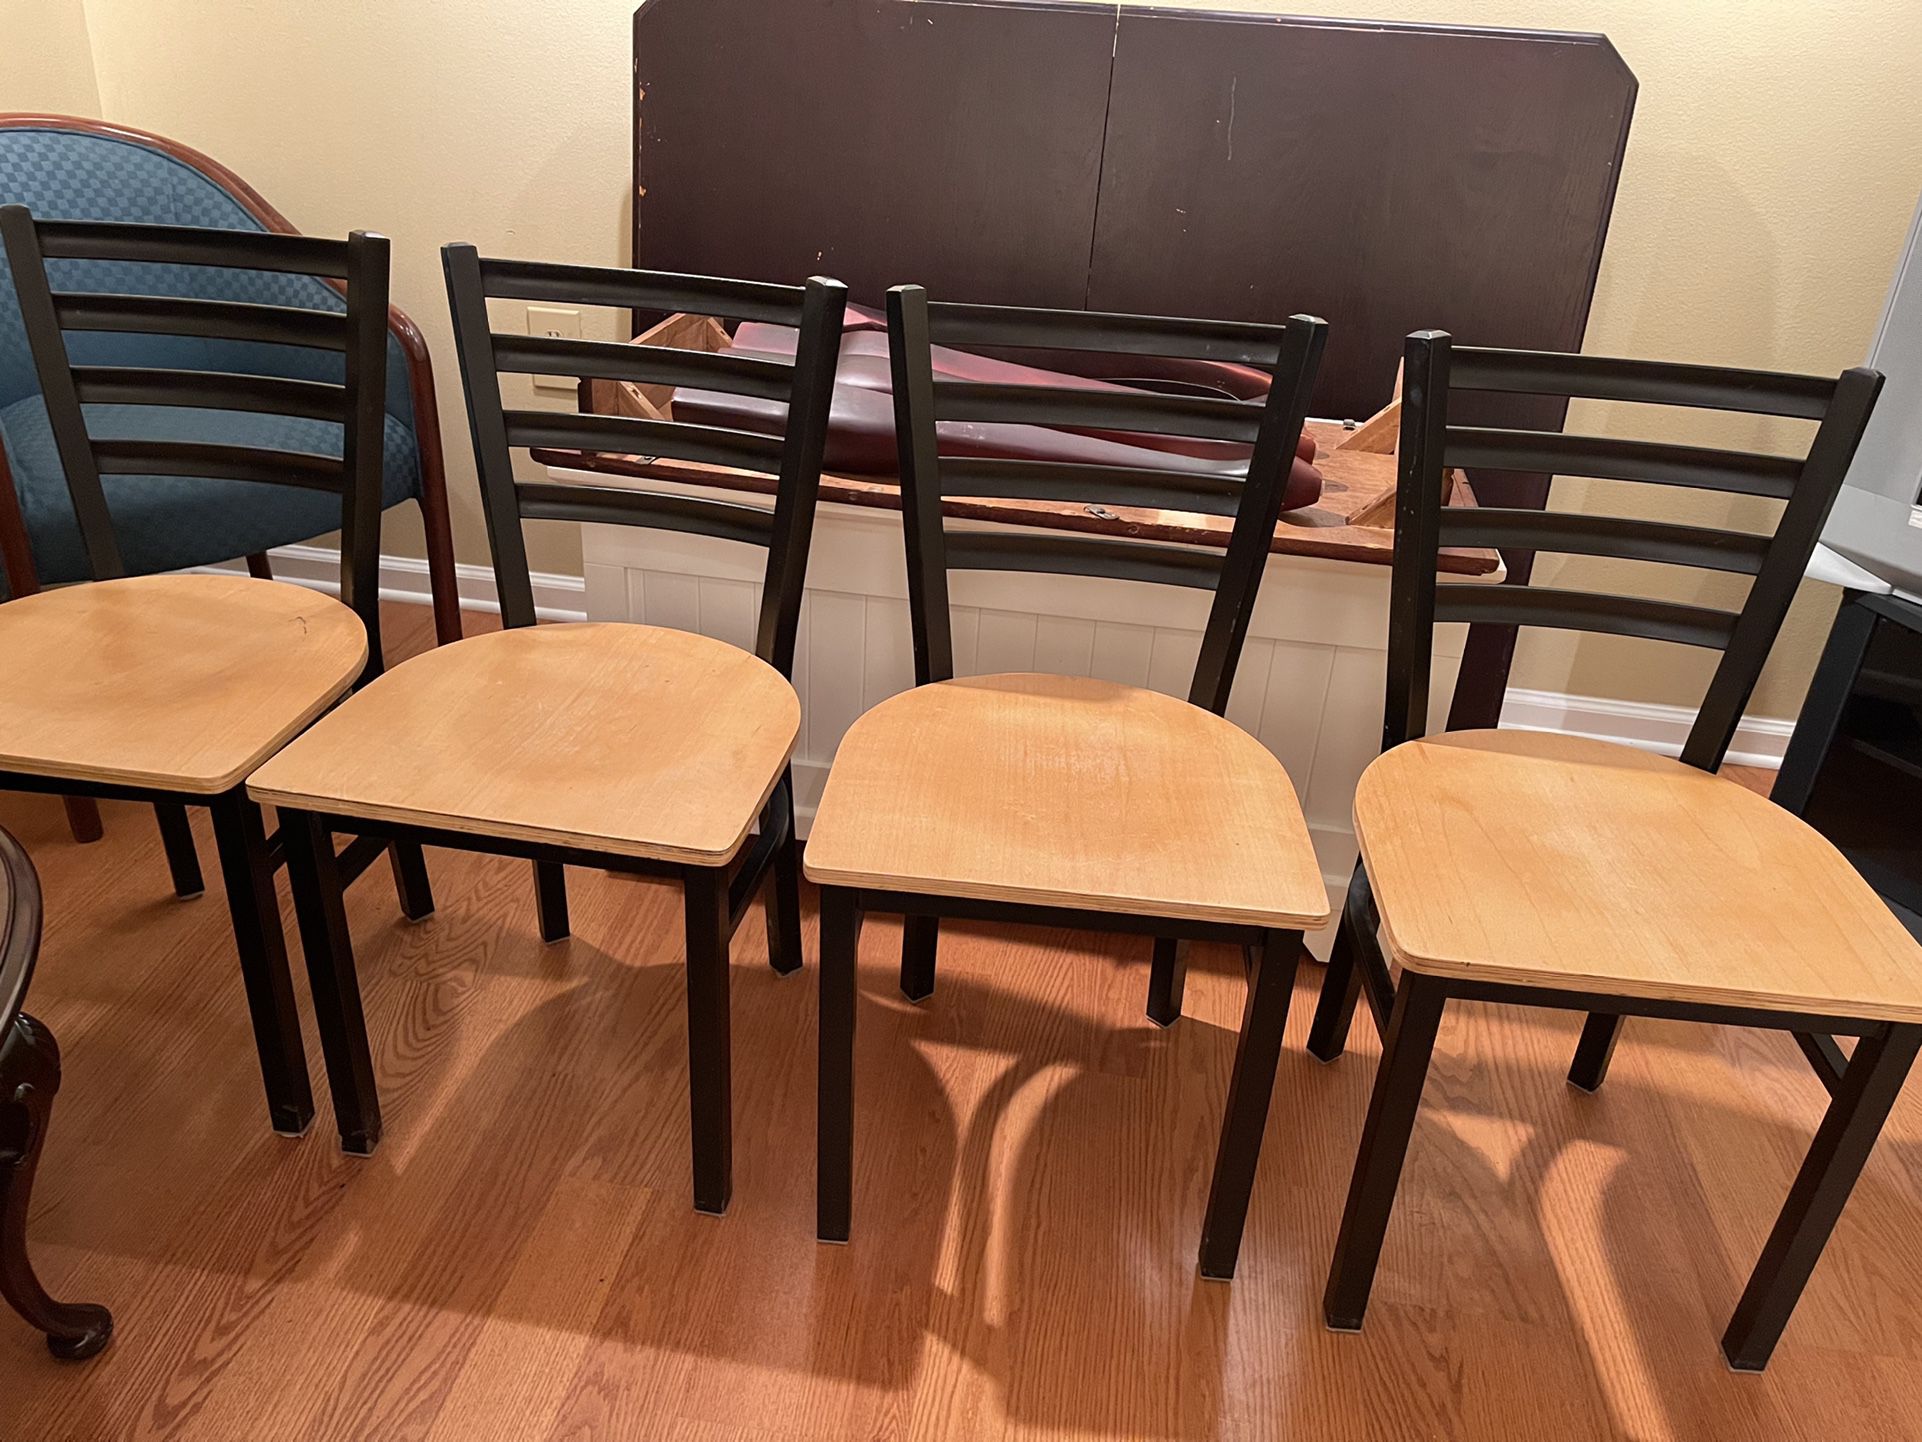 Wood Table + 4 Chairs + Leaf